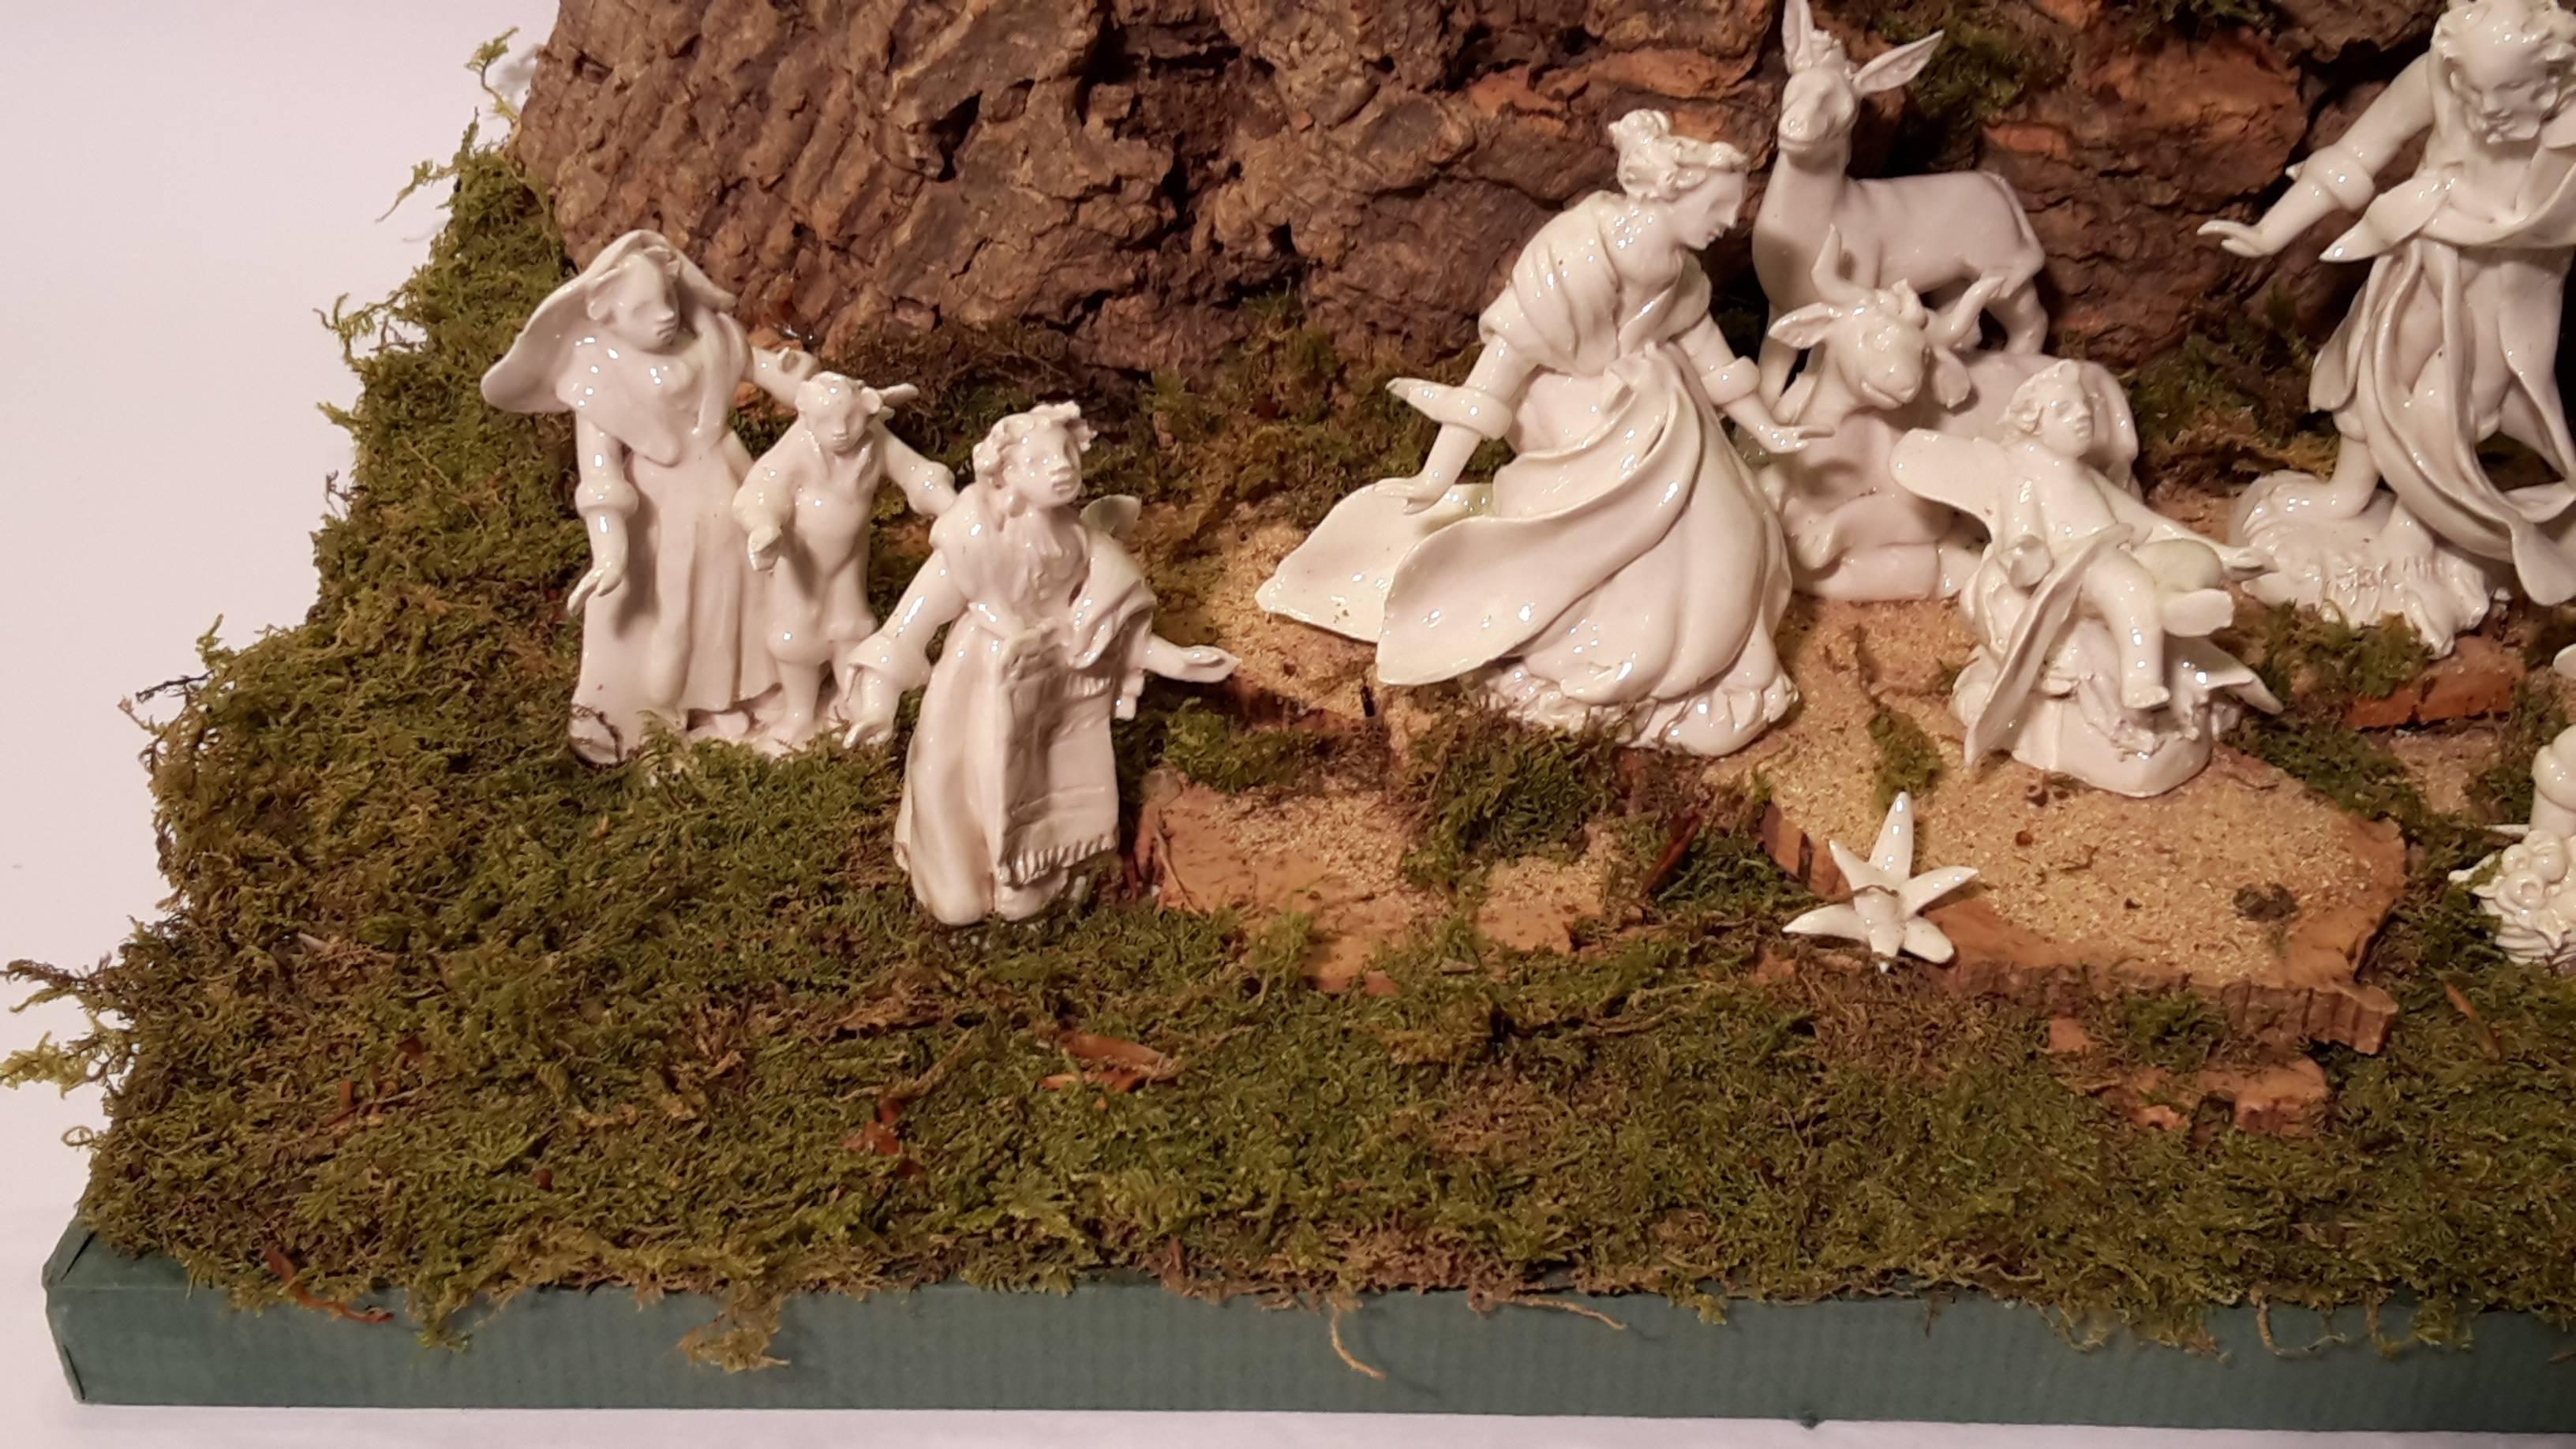 Contemporary nativity scene, handmade according to the Neapolitan tradition from the Baroque period, the use of the white porcelain, the mountain on which the angels flying, is in carved cork. The base is made of wood painted green with moss.